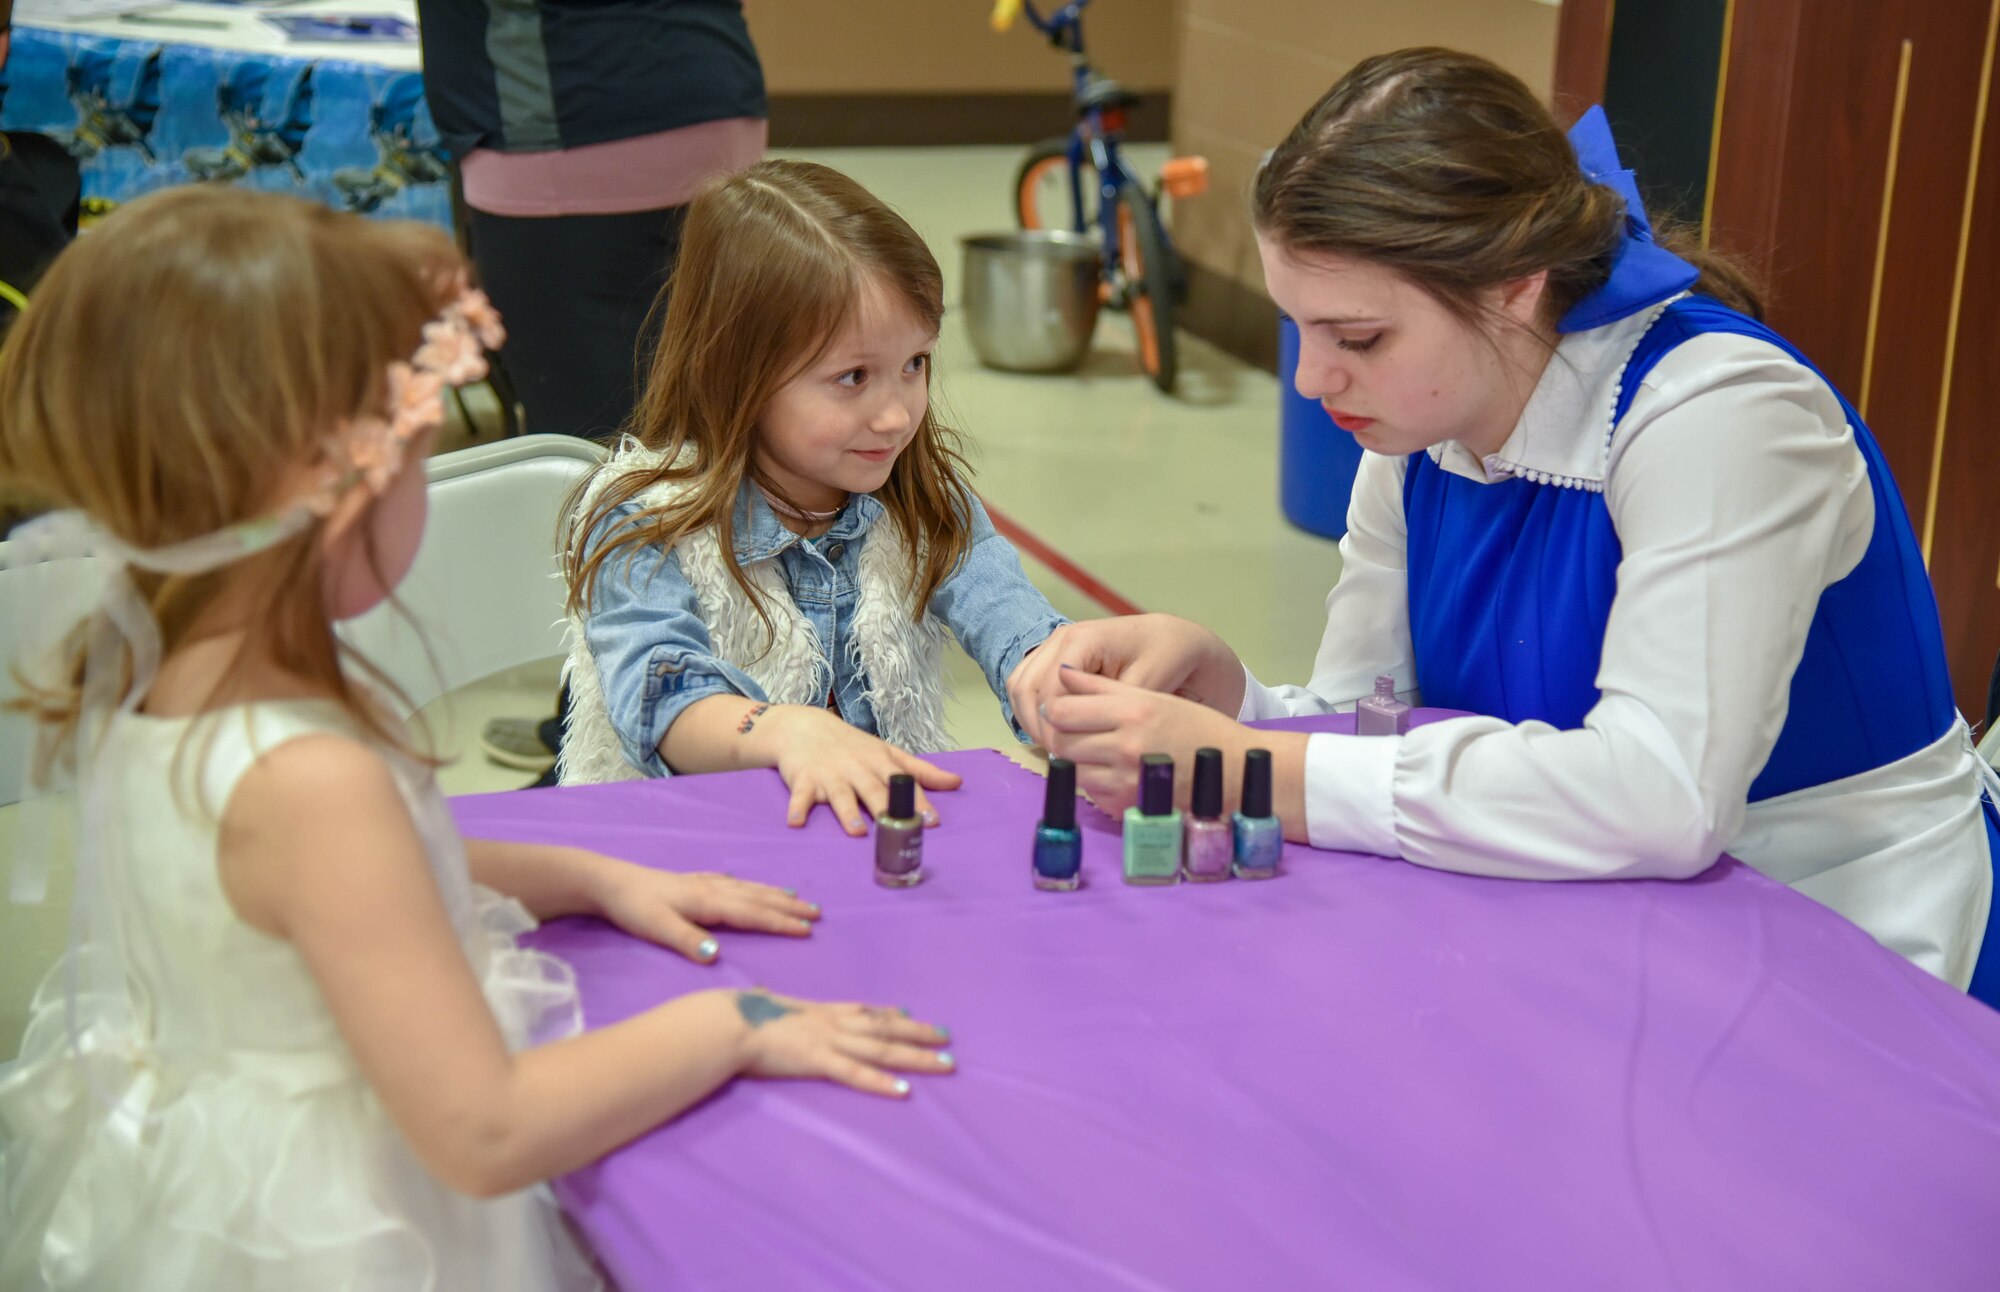 Addison and Baylee Johnson, daughters of 114th Fighter Wing members Master Sgt. Brian Johnson and Senior Master Sgt. Beth Johnson, gets their nails painted by Sophia Gapp, South Dakota National Guard Youth Council member, during the Princess and Super Hero Day Camp April 7, 2018, at the National Guard Armory, Sioux Falls, S.D.